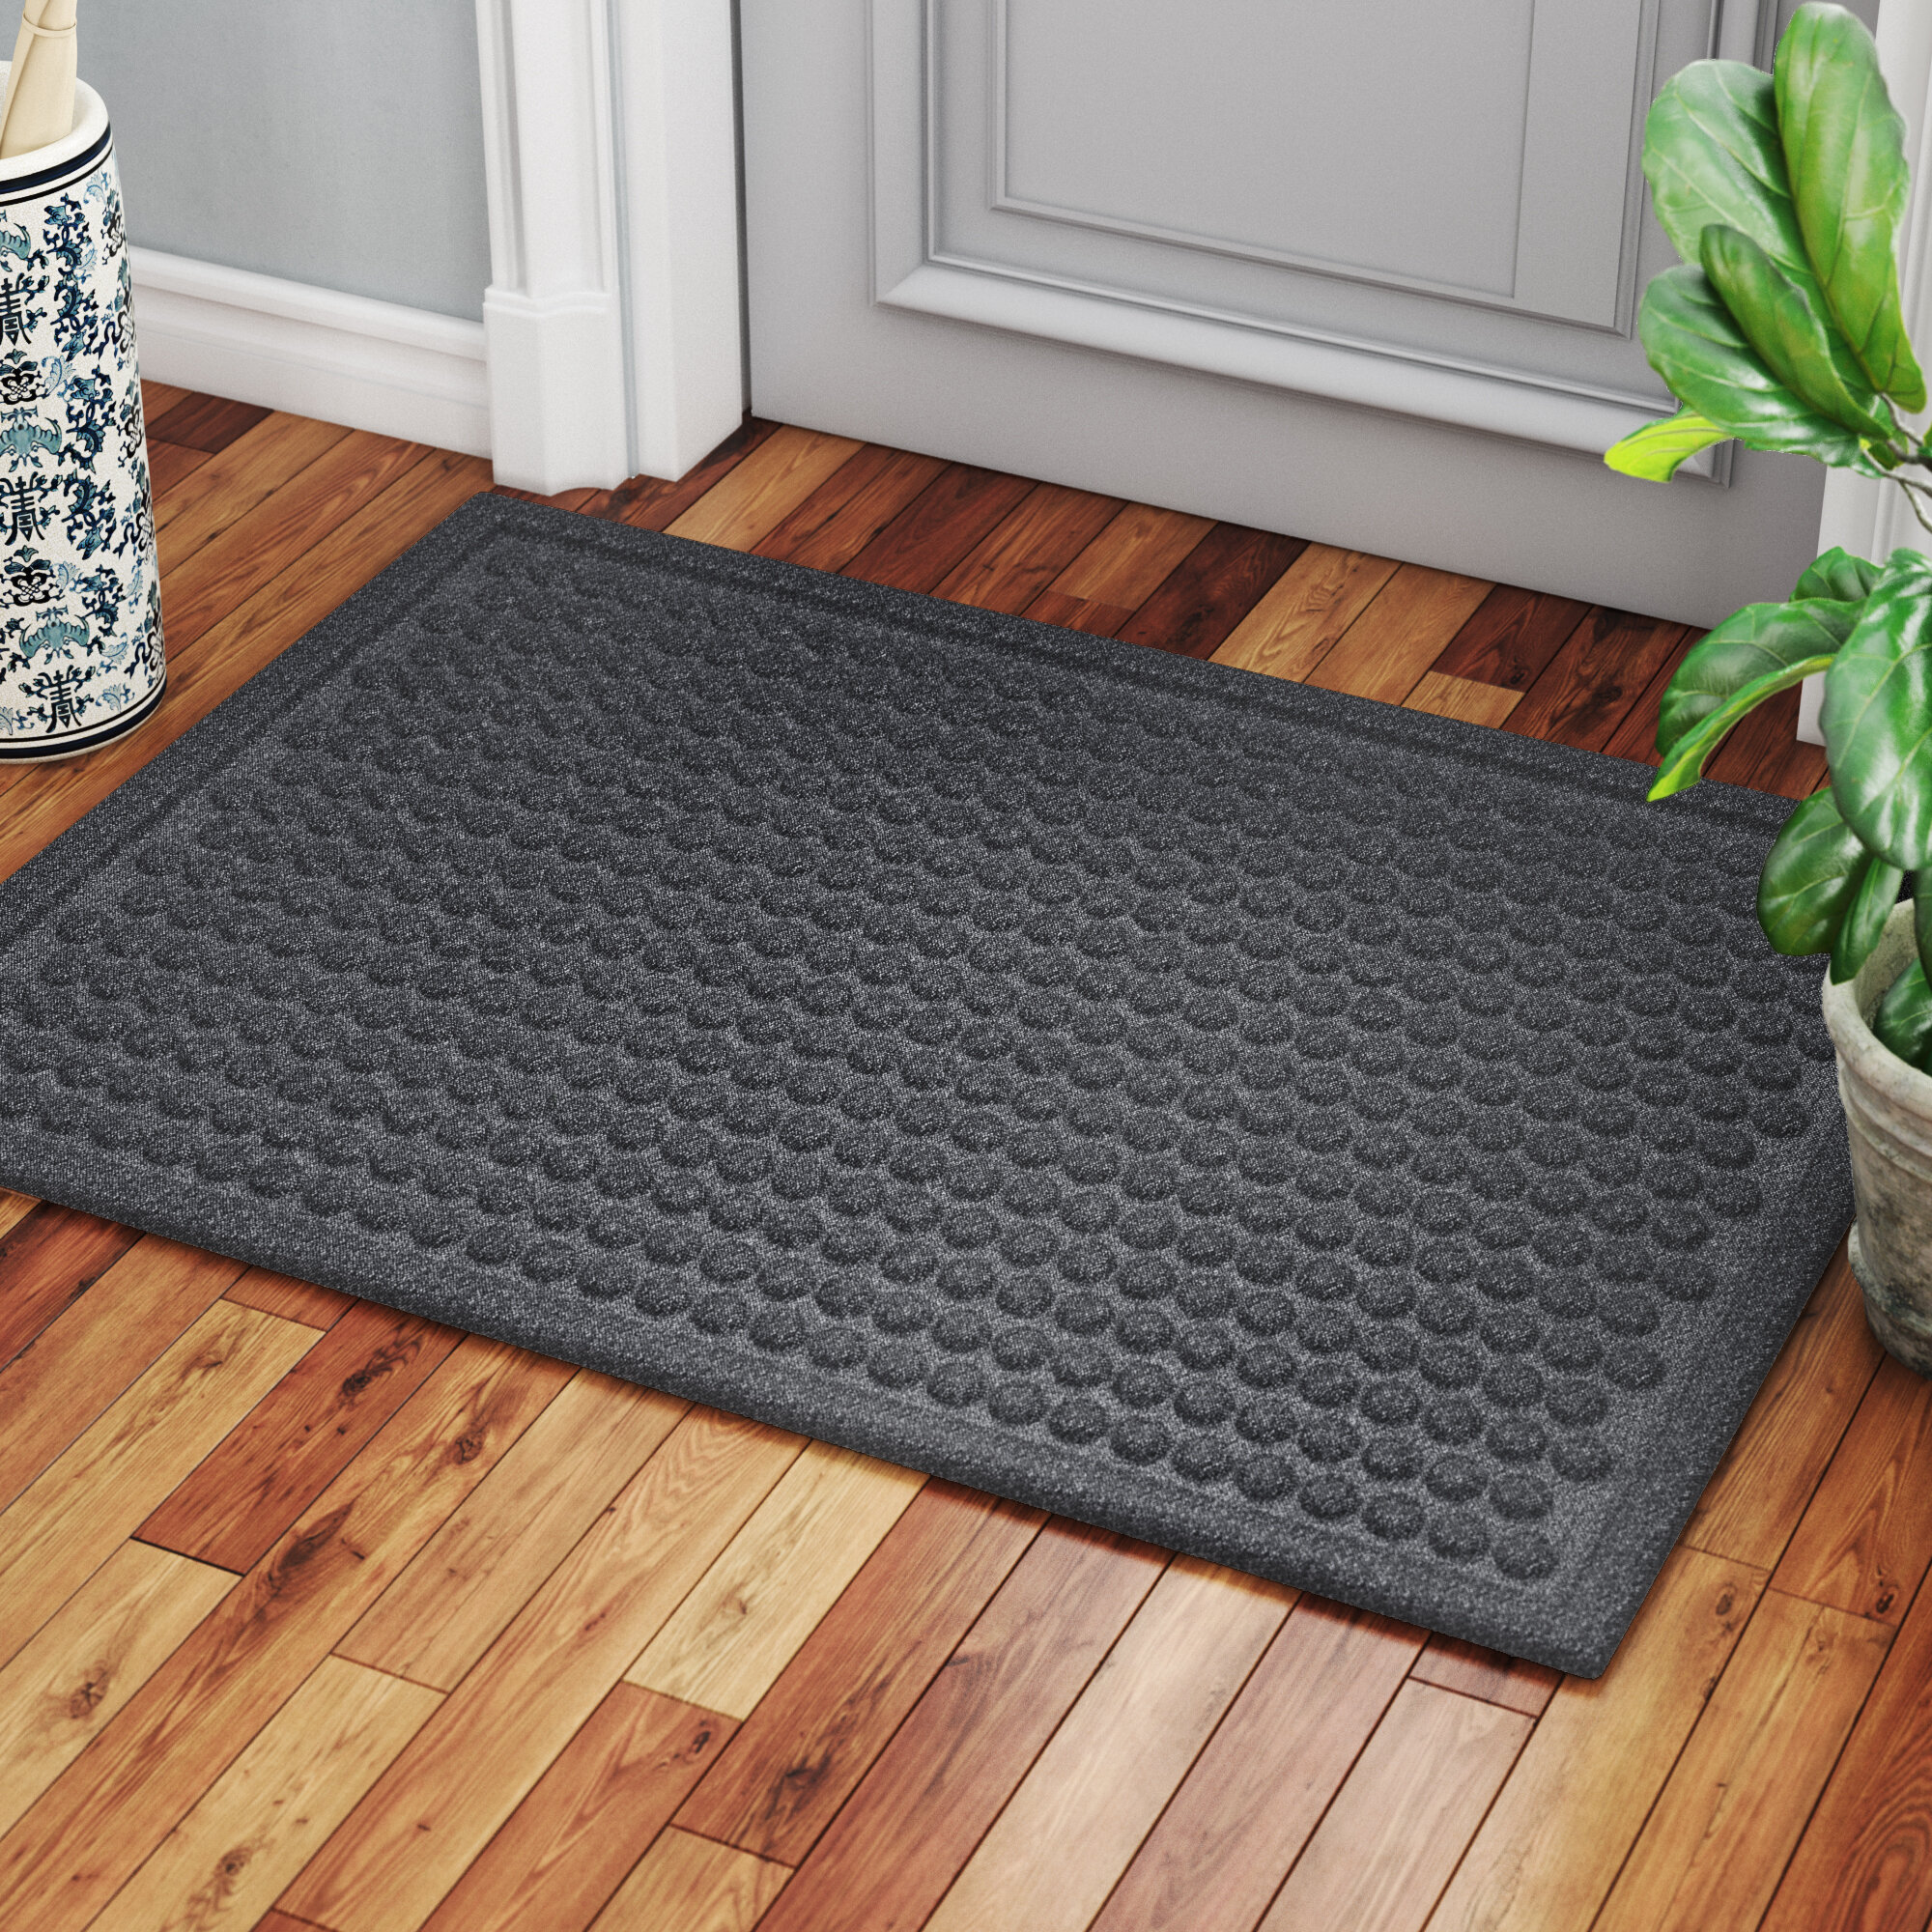 New Non Slip Doormat 14 Sizes Large Small Entrance and Out door Door Dust Barrie 